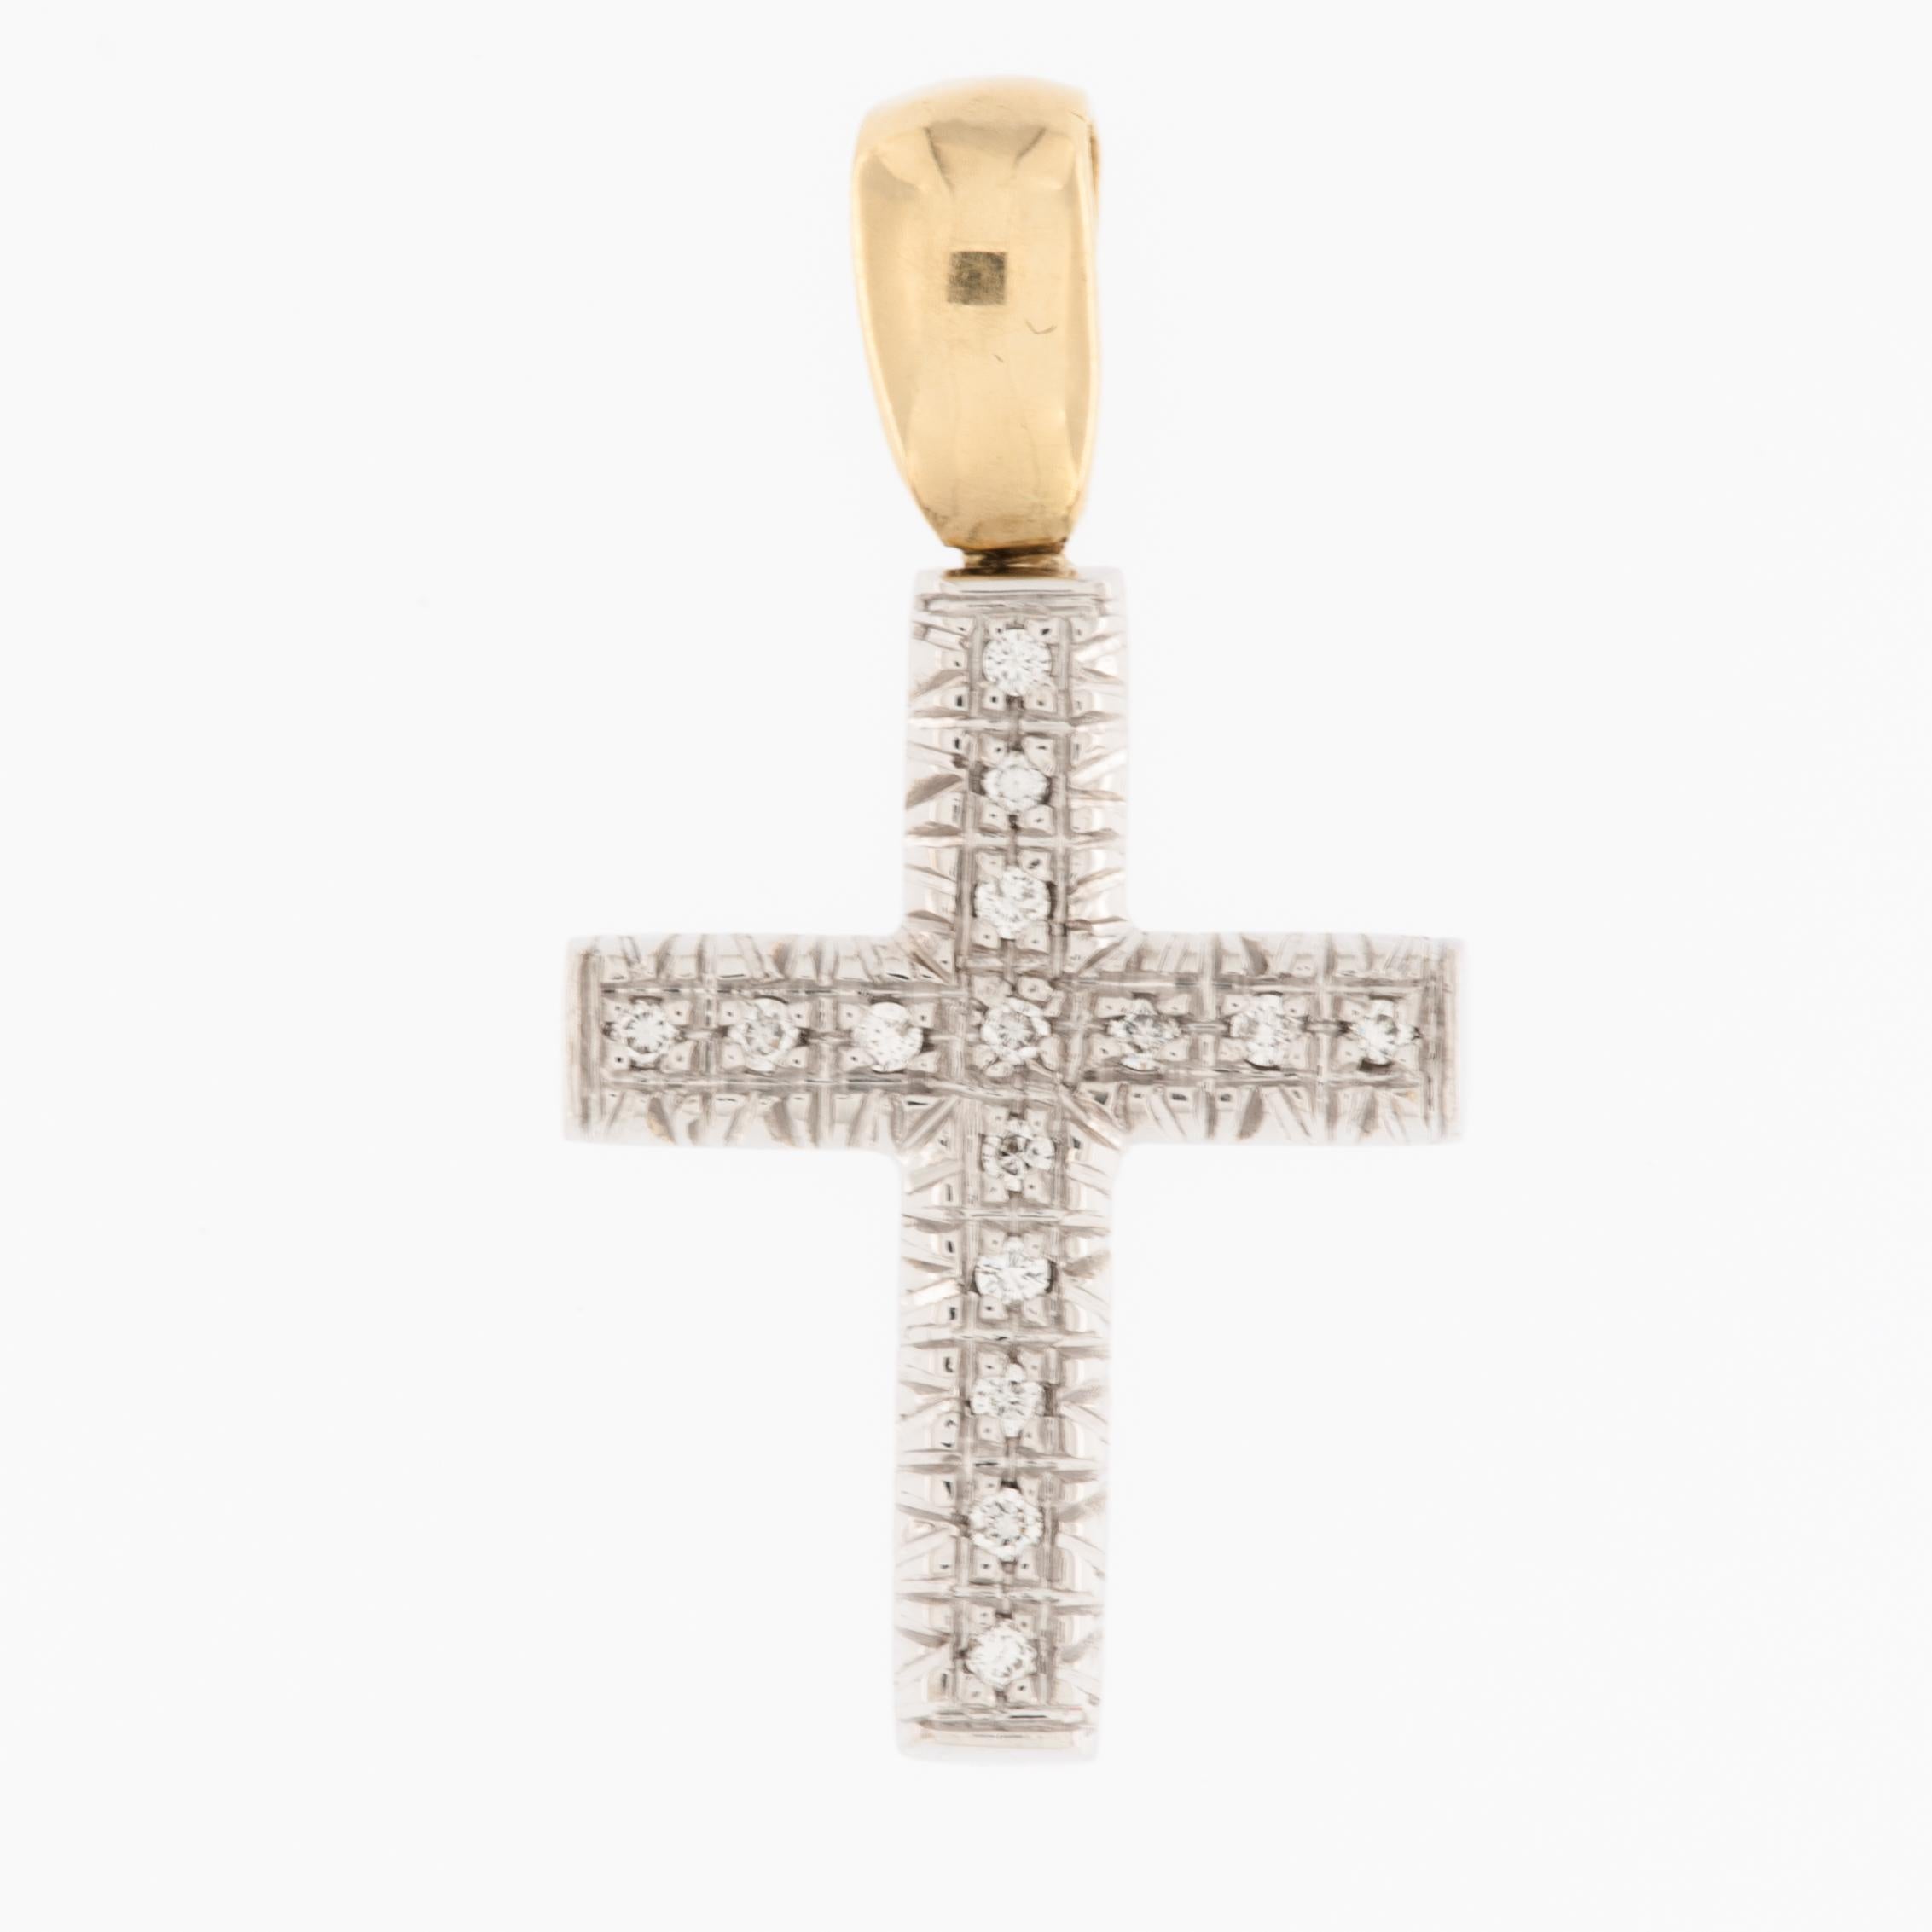 The Italian Yellow and White Gold Cross with Diamonds featuring relief work is a stunning piece of jewelry that combines traditional craftsmanship with the elegance of precious metals and sparkling gemstones. 

The cross is crafted from a